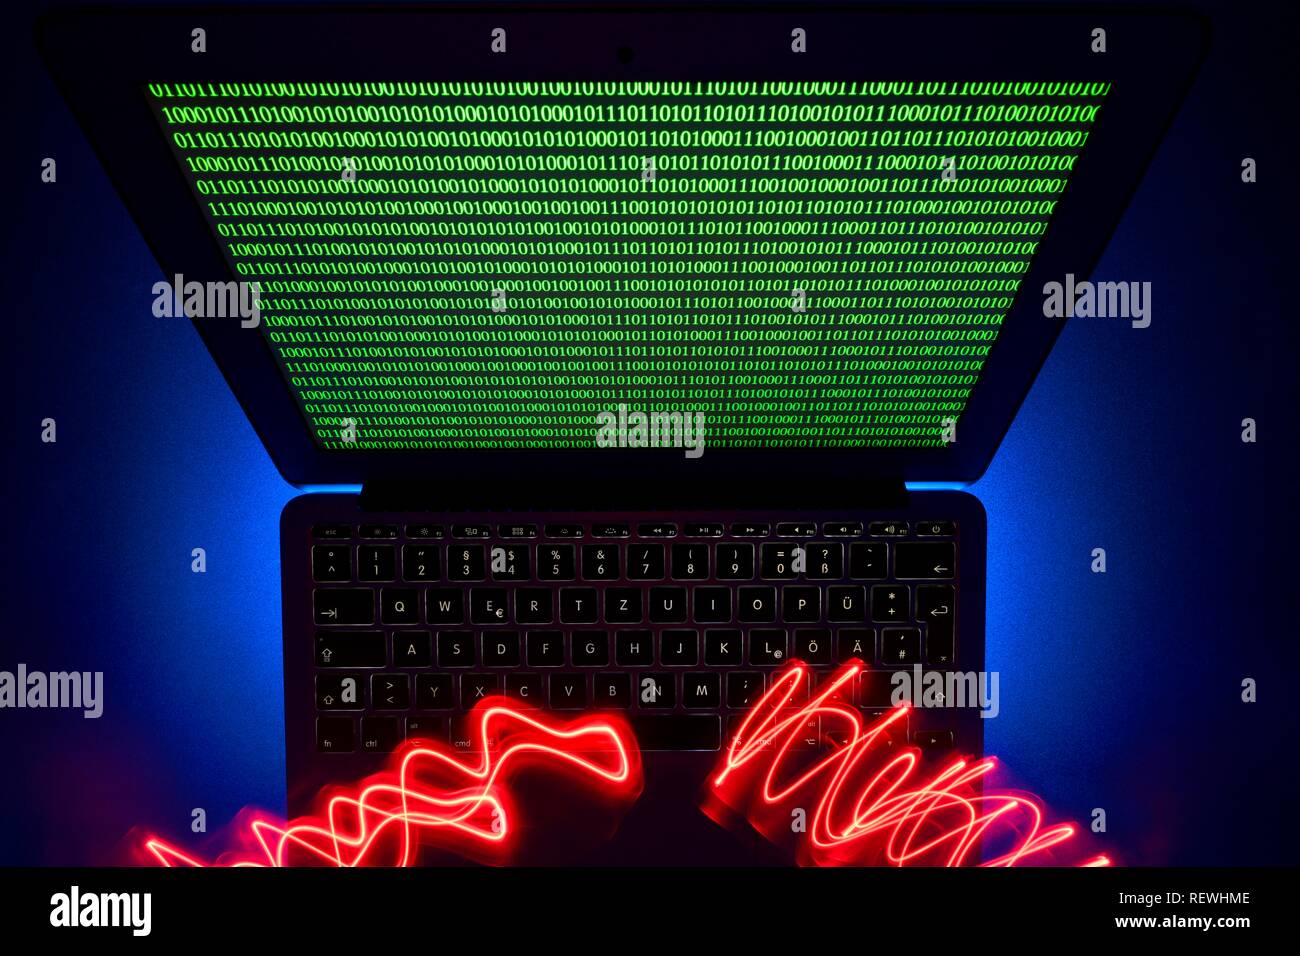 Traces of light on computer keyboard, symbol image cybercrime, computer crime, data protection, Baden-Württemberg, Germany Stock Photo